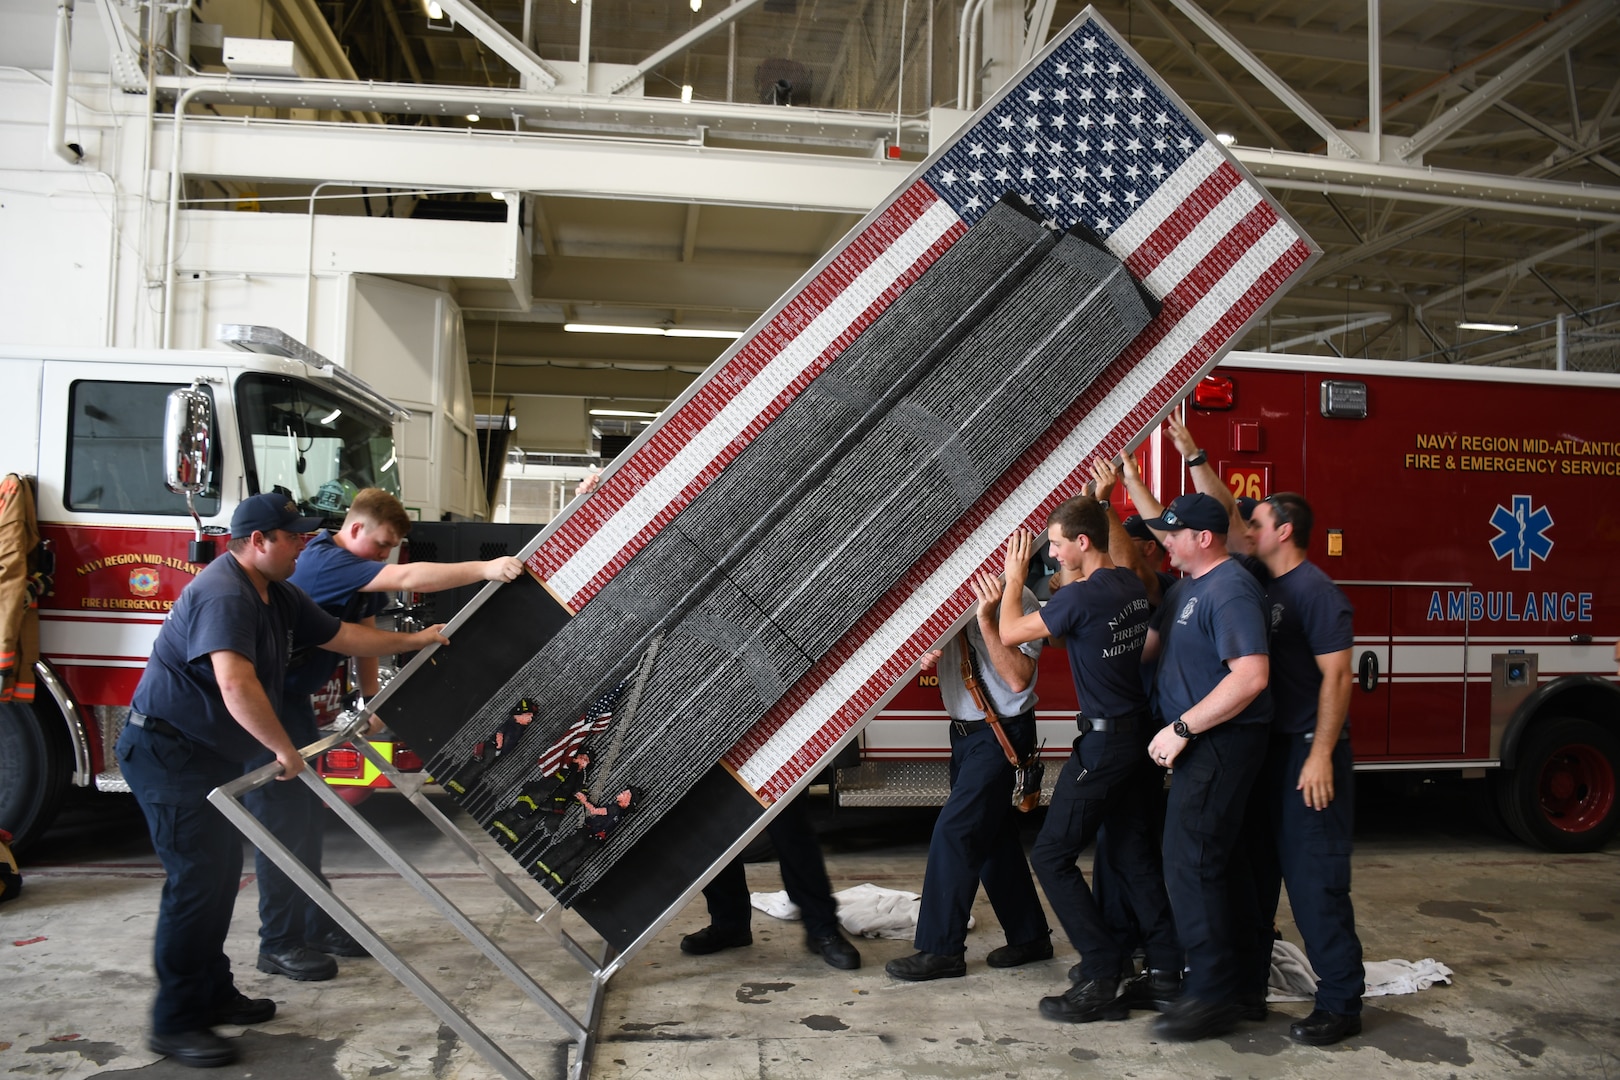 Members of the Navy Region Mid-Atlantic Fire and Emergency Services at Norfolk Naval Shipyard (NNSY) raise the 9/11 memorial artwork called “Divinity Among Heroes.” NNSY SurgeMain Sailor, Machinist Mate Chief Petty Officer (MMC)  Joseph Pisano, created the tribute piece during his off duty hours. The tribute piece is made up of 30,000+ drywall and trim screws, 2,978 one-inch wooden blocks, the base, a simulated fire truck, is constructed of authentic gauges, cranks, handles, hoses, chevrons, and plates from a decommissioned fire truck and it stands 12 foot tall by four foot wide.